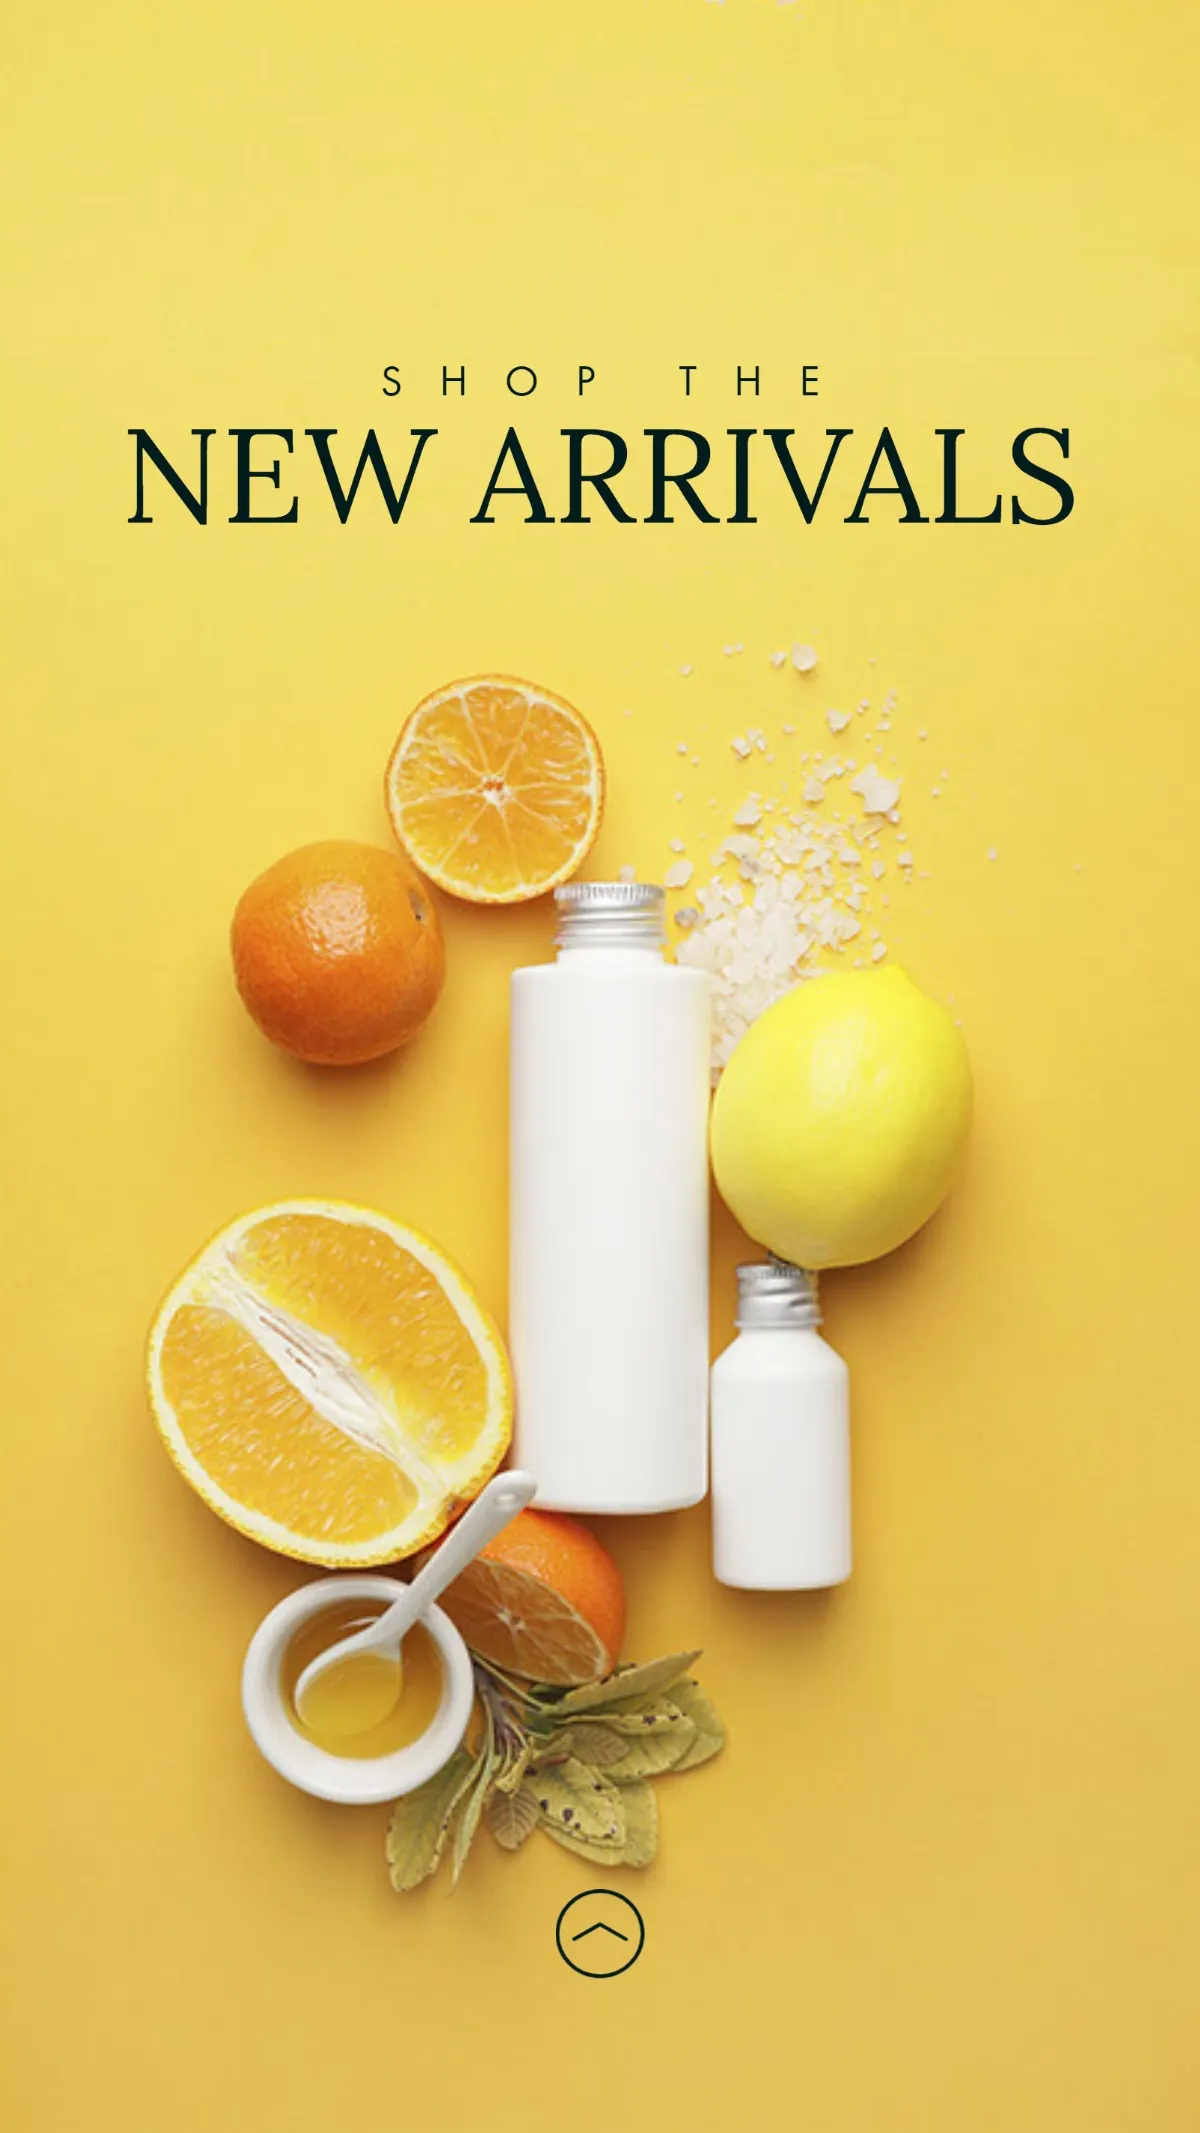 Yellow Fruit and Products Photo New Arrivals Instagram Story